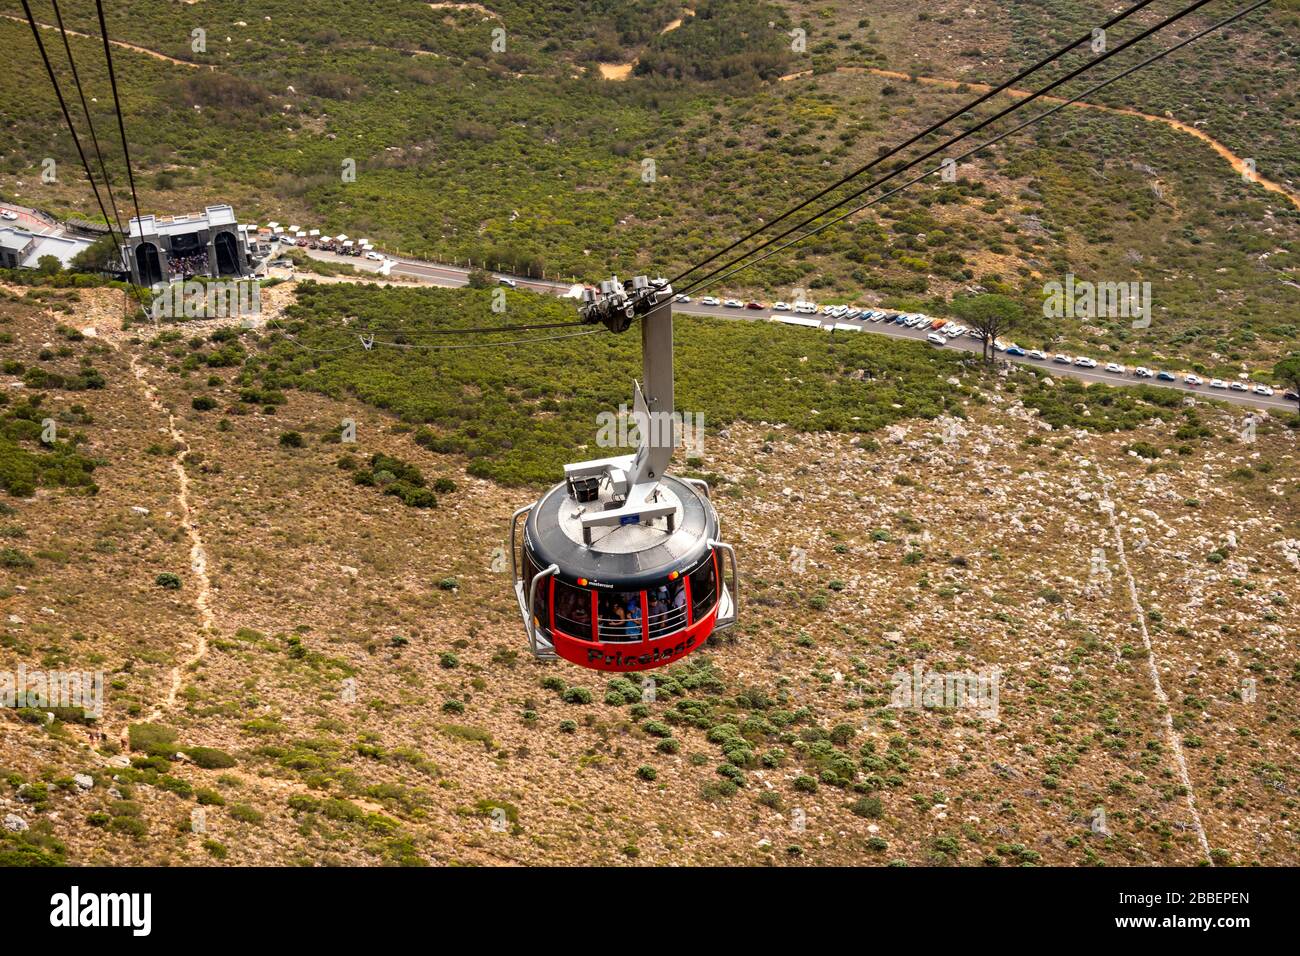 South Africa, Cape Town, Tafelberg Road, Table Mountain Aerial Cableway, swiss-made Rotair rotating cable car Stock Photo